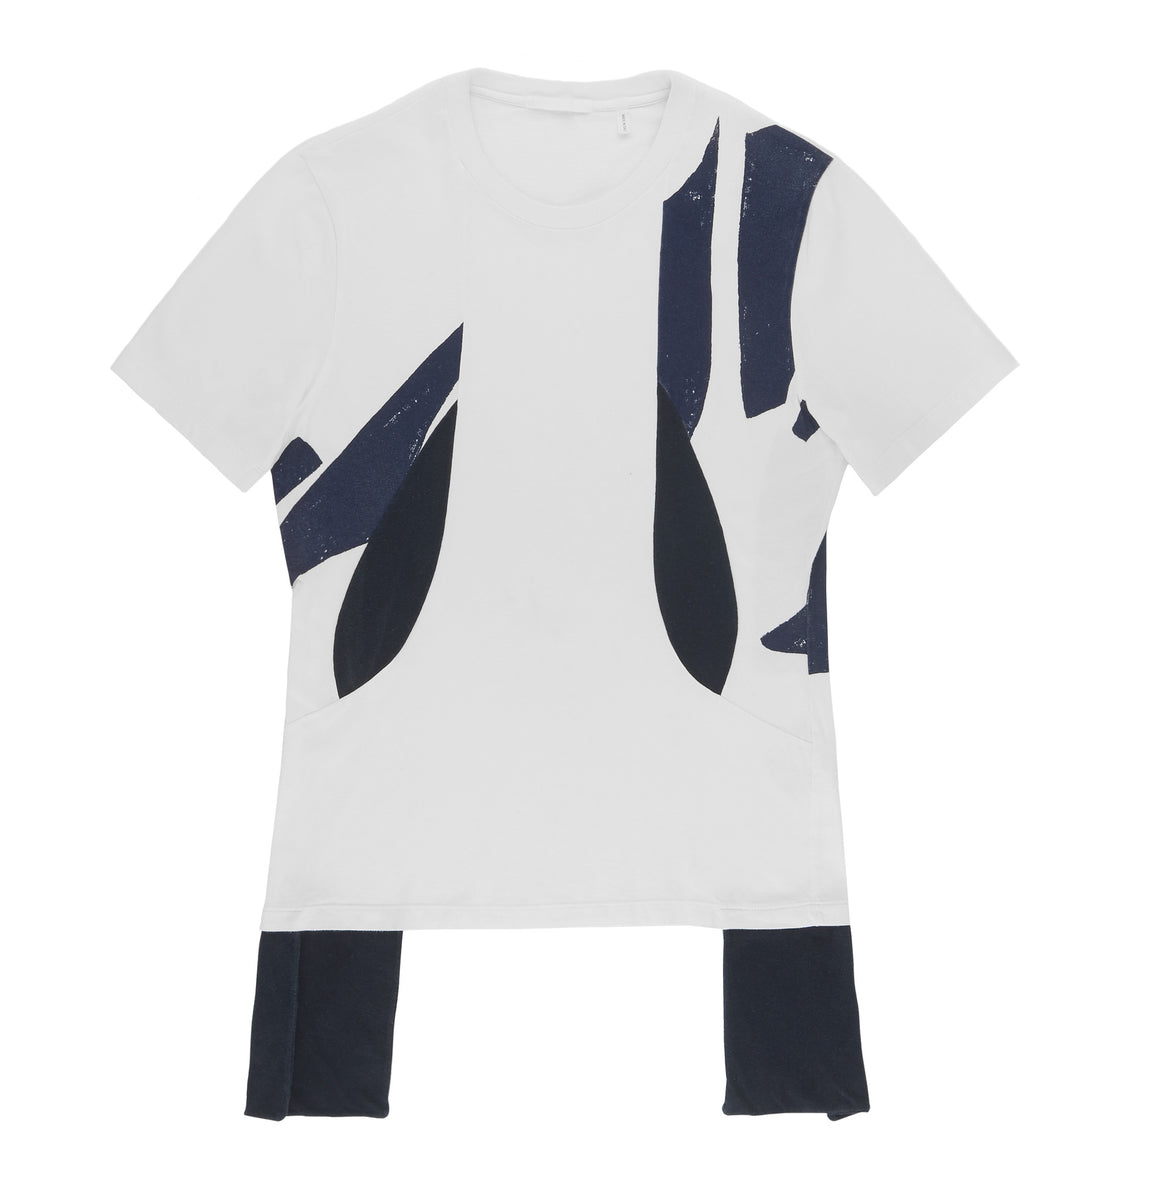 Lang – Leg Straps ENDYMA 2003 with Deconstructed Helmut Abstract T-Shirt